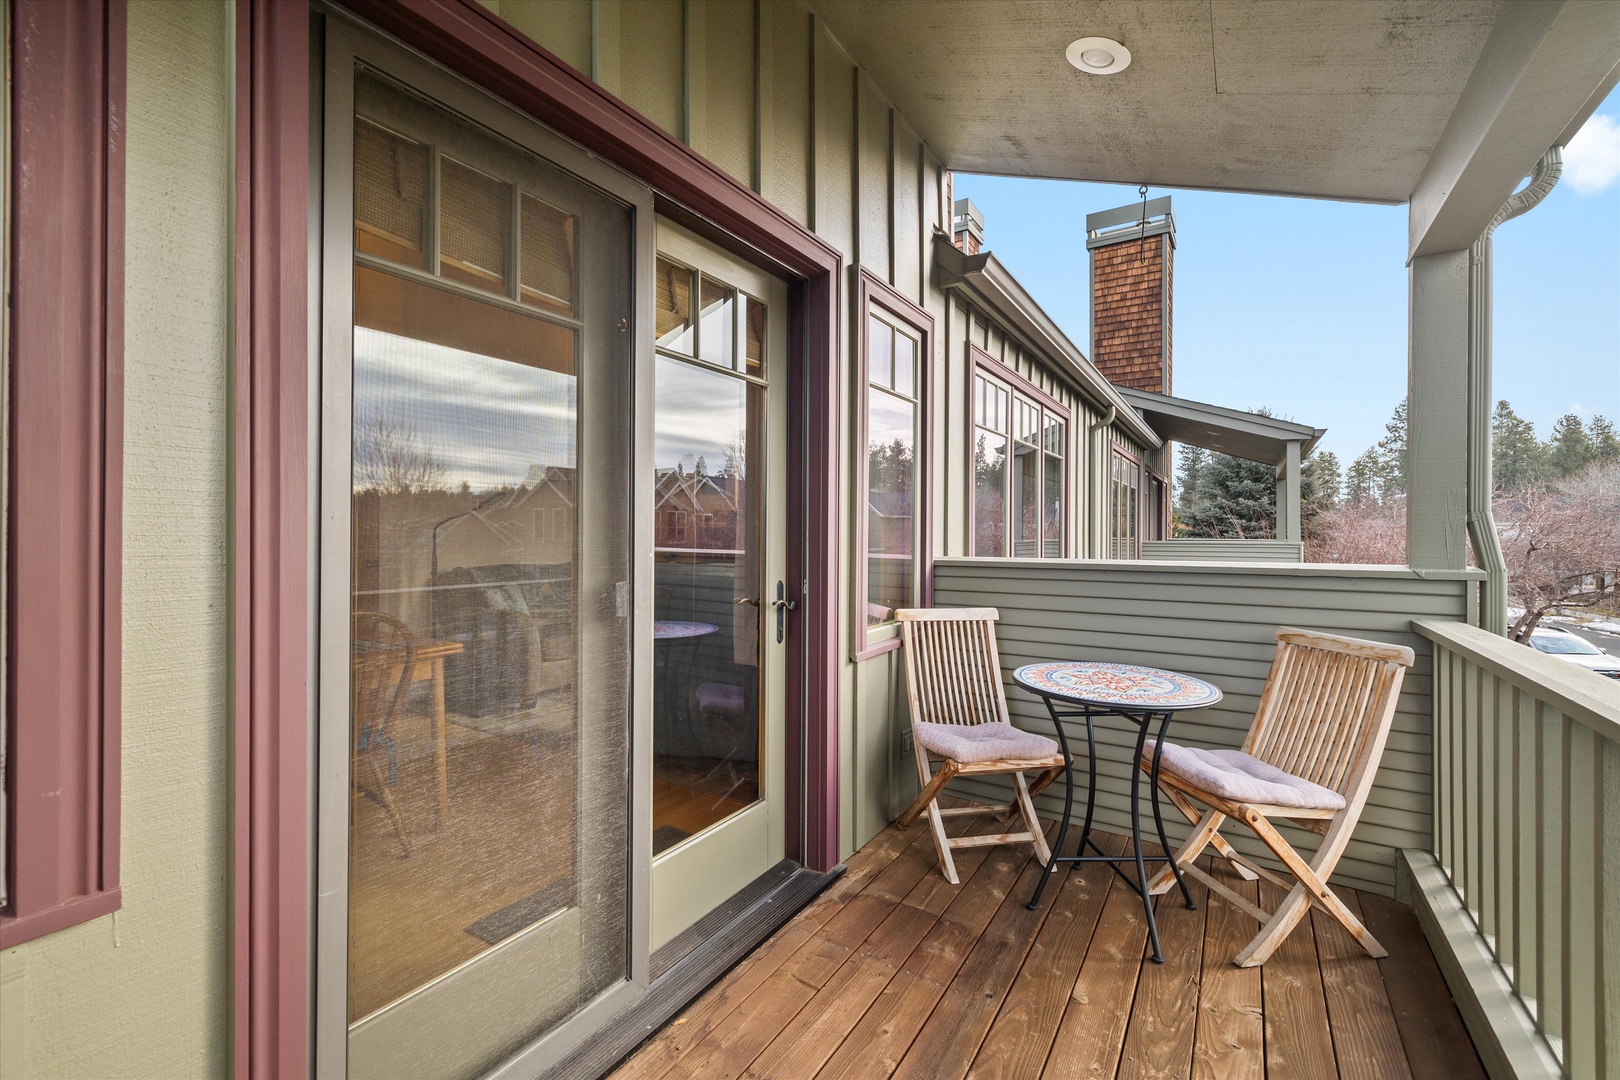 Sip morning coffee or grab a bite alfresco on the front deck